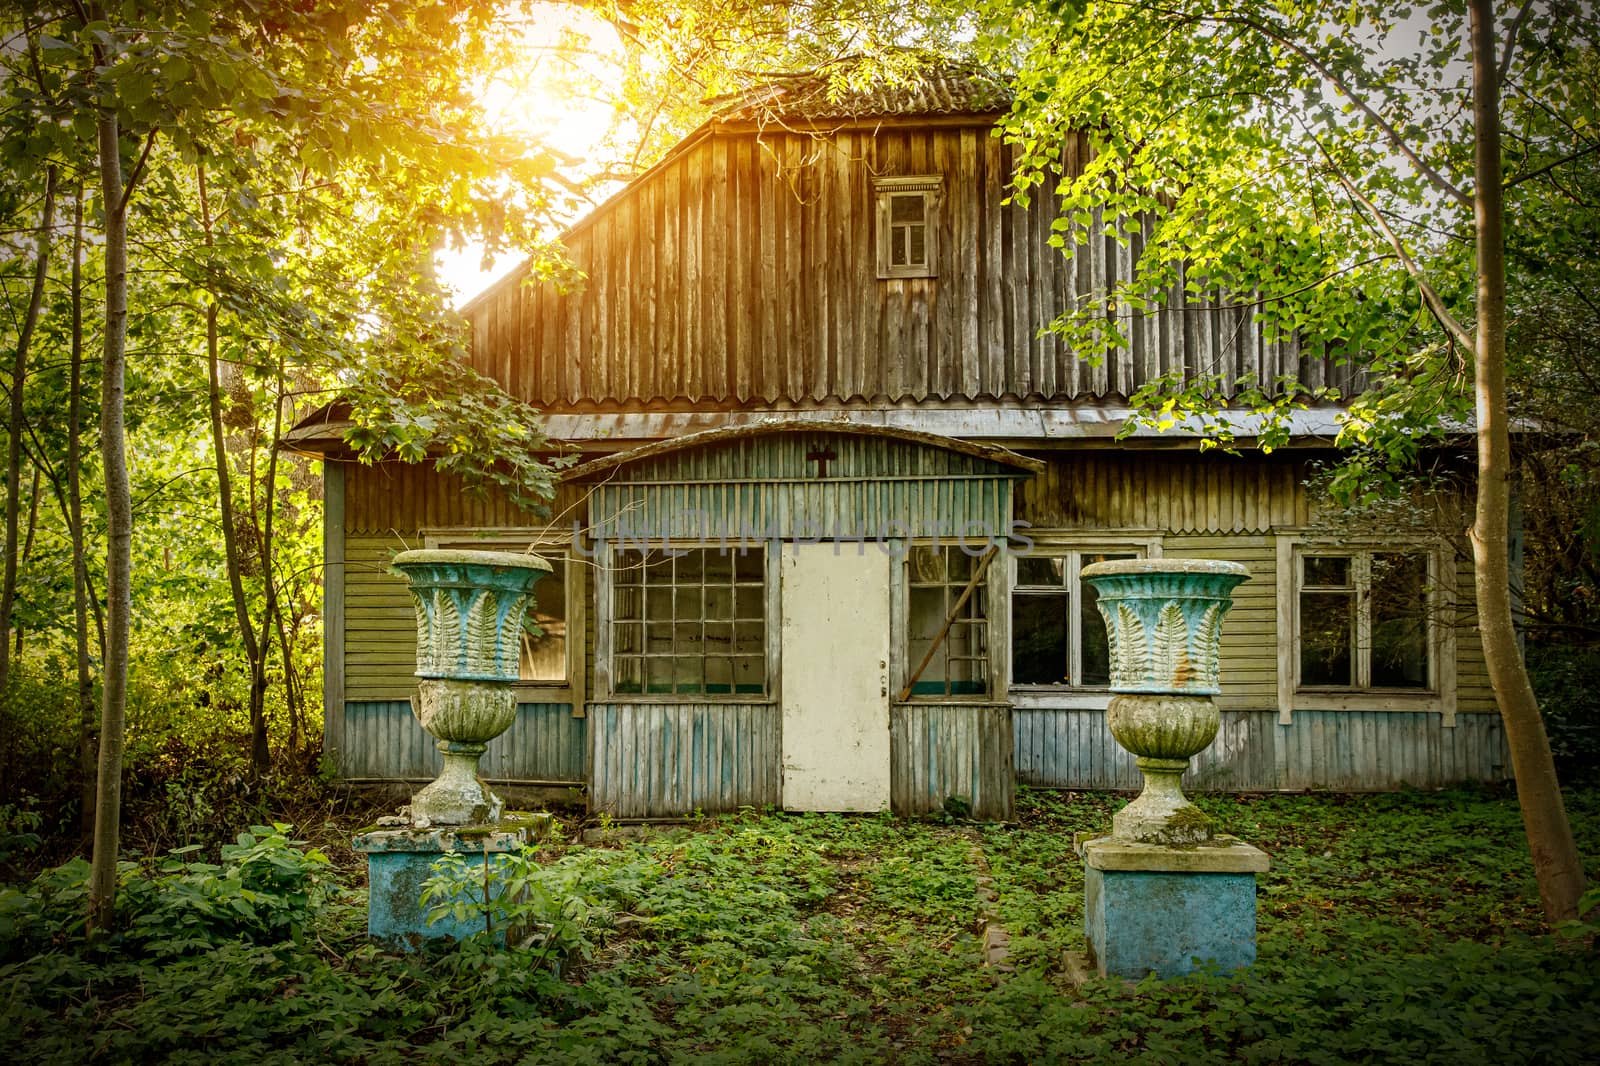 Old wooden abandoned house in the forest